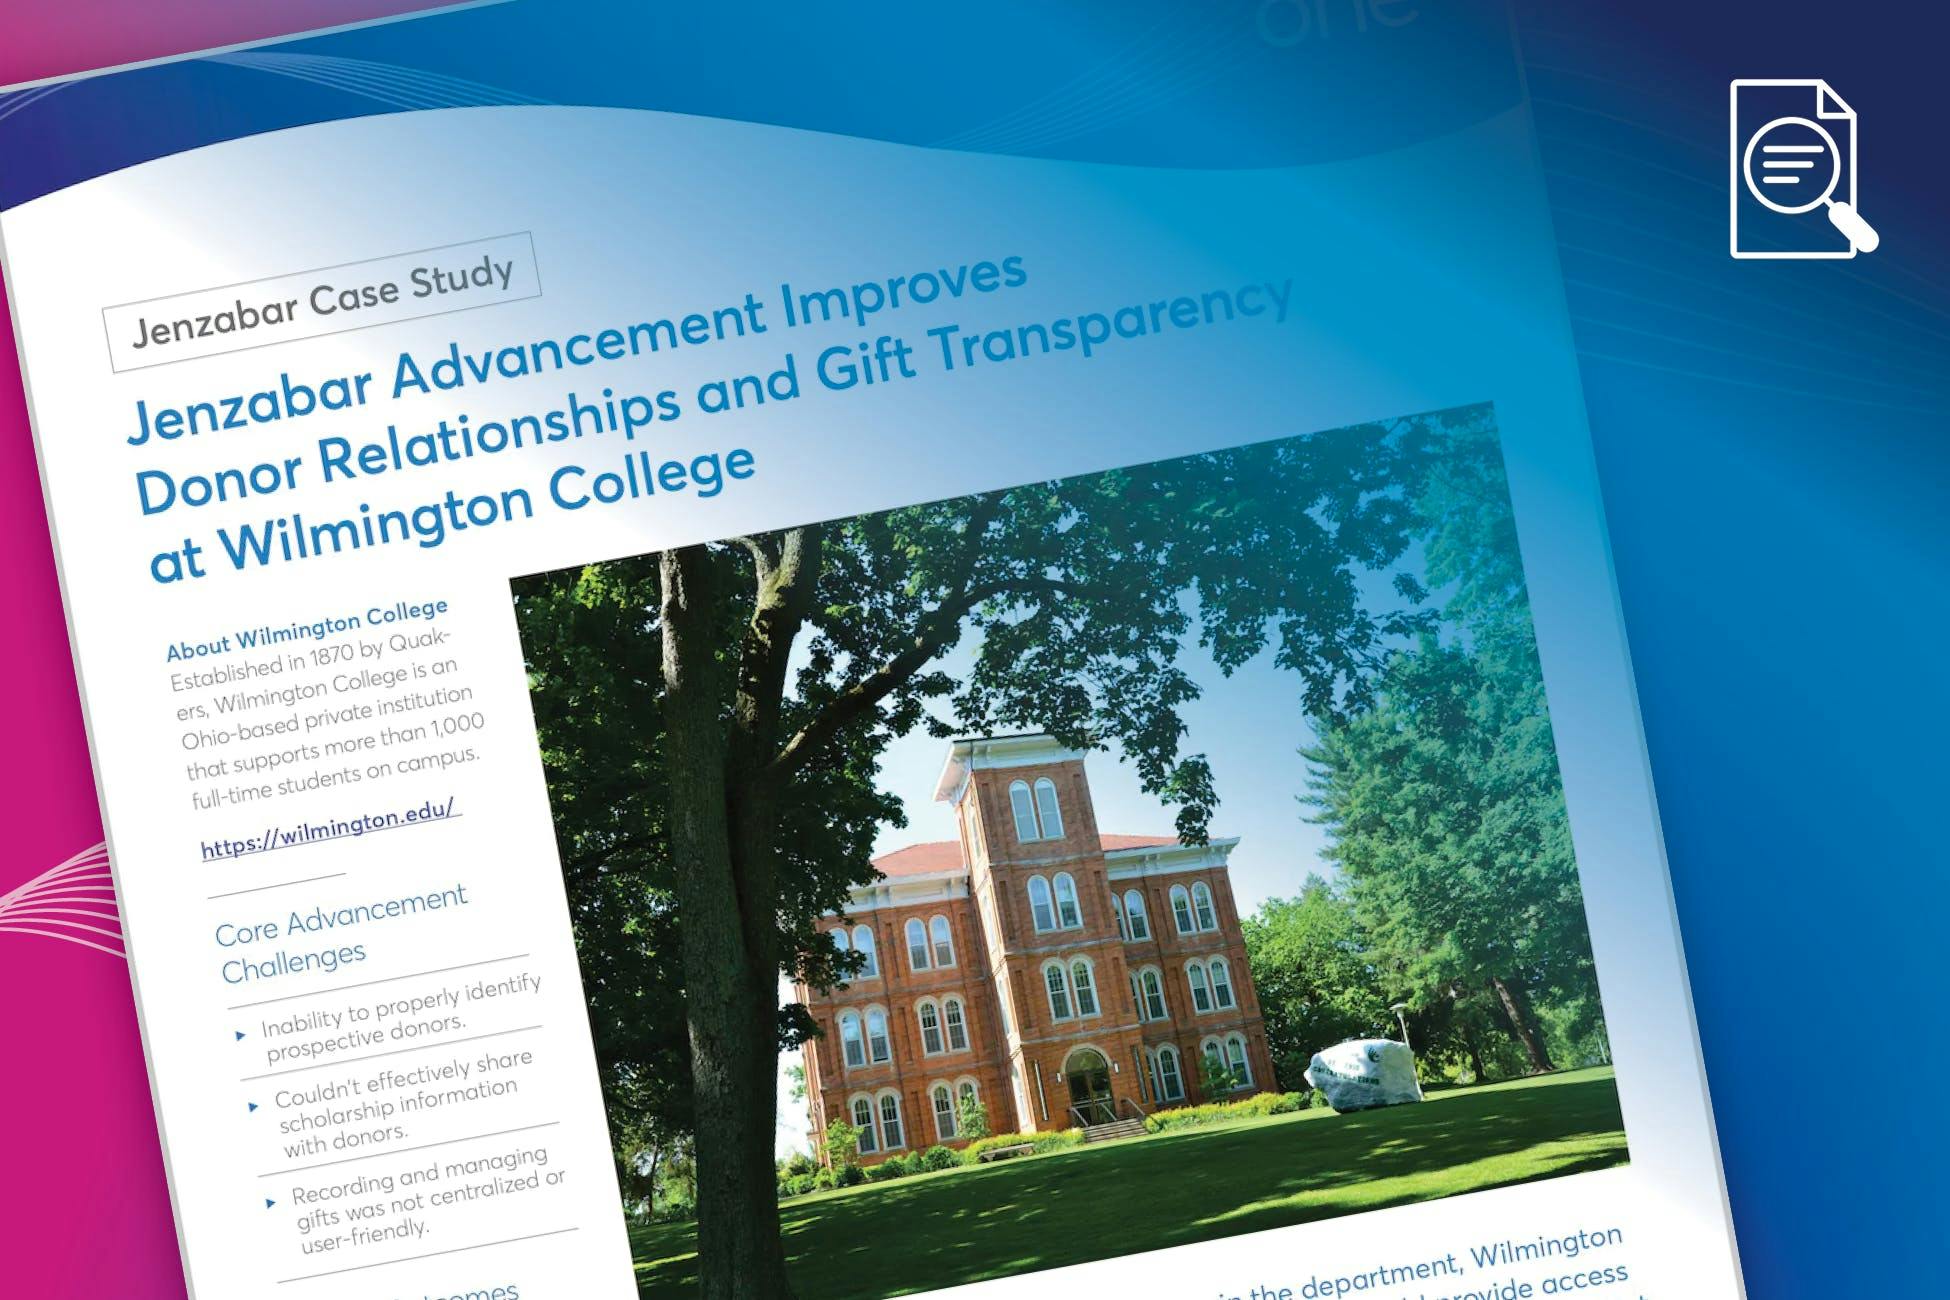 Case Study: Jenzabar Advancement Improves Donor Relationships and Gift Transparency at Wilmington College